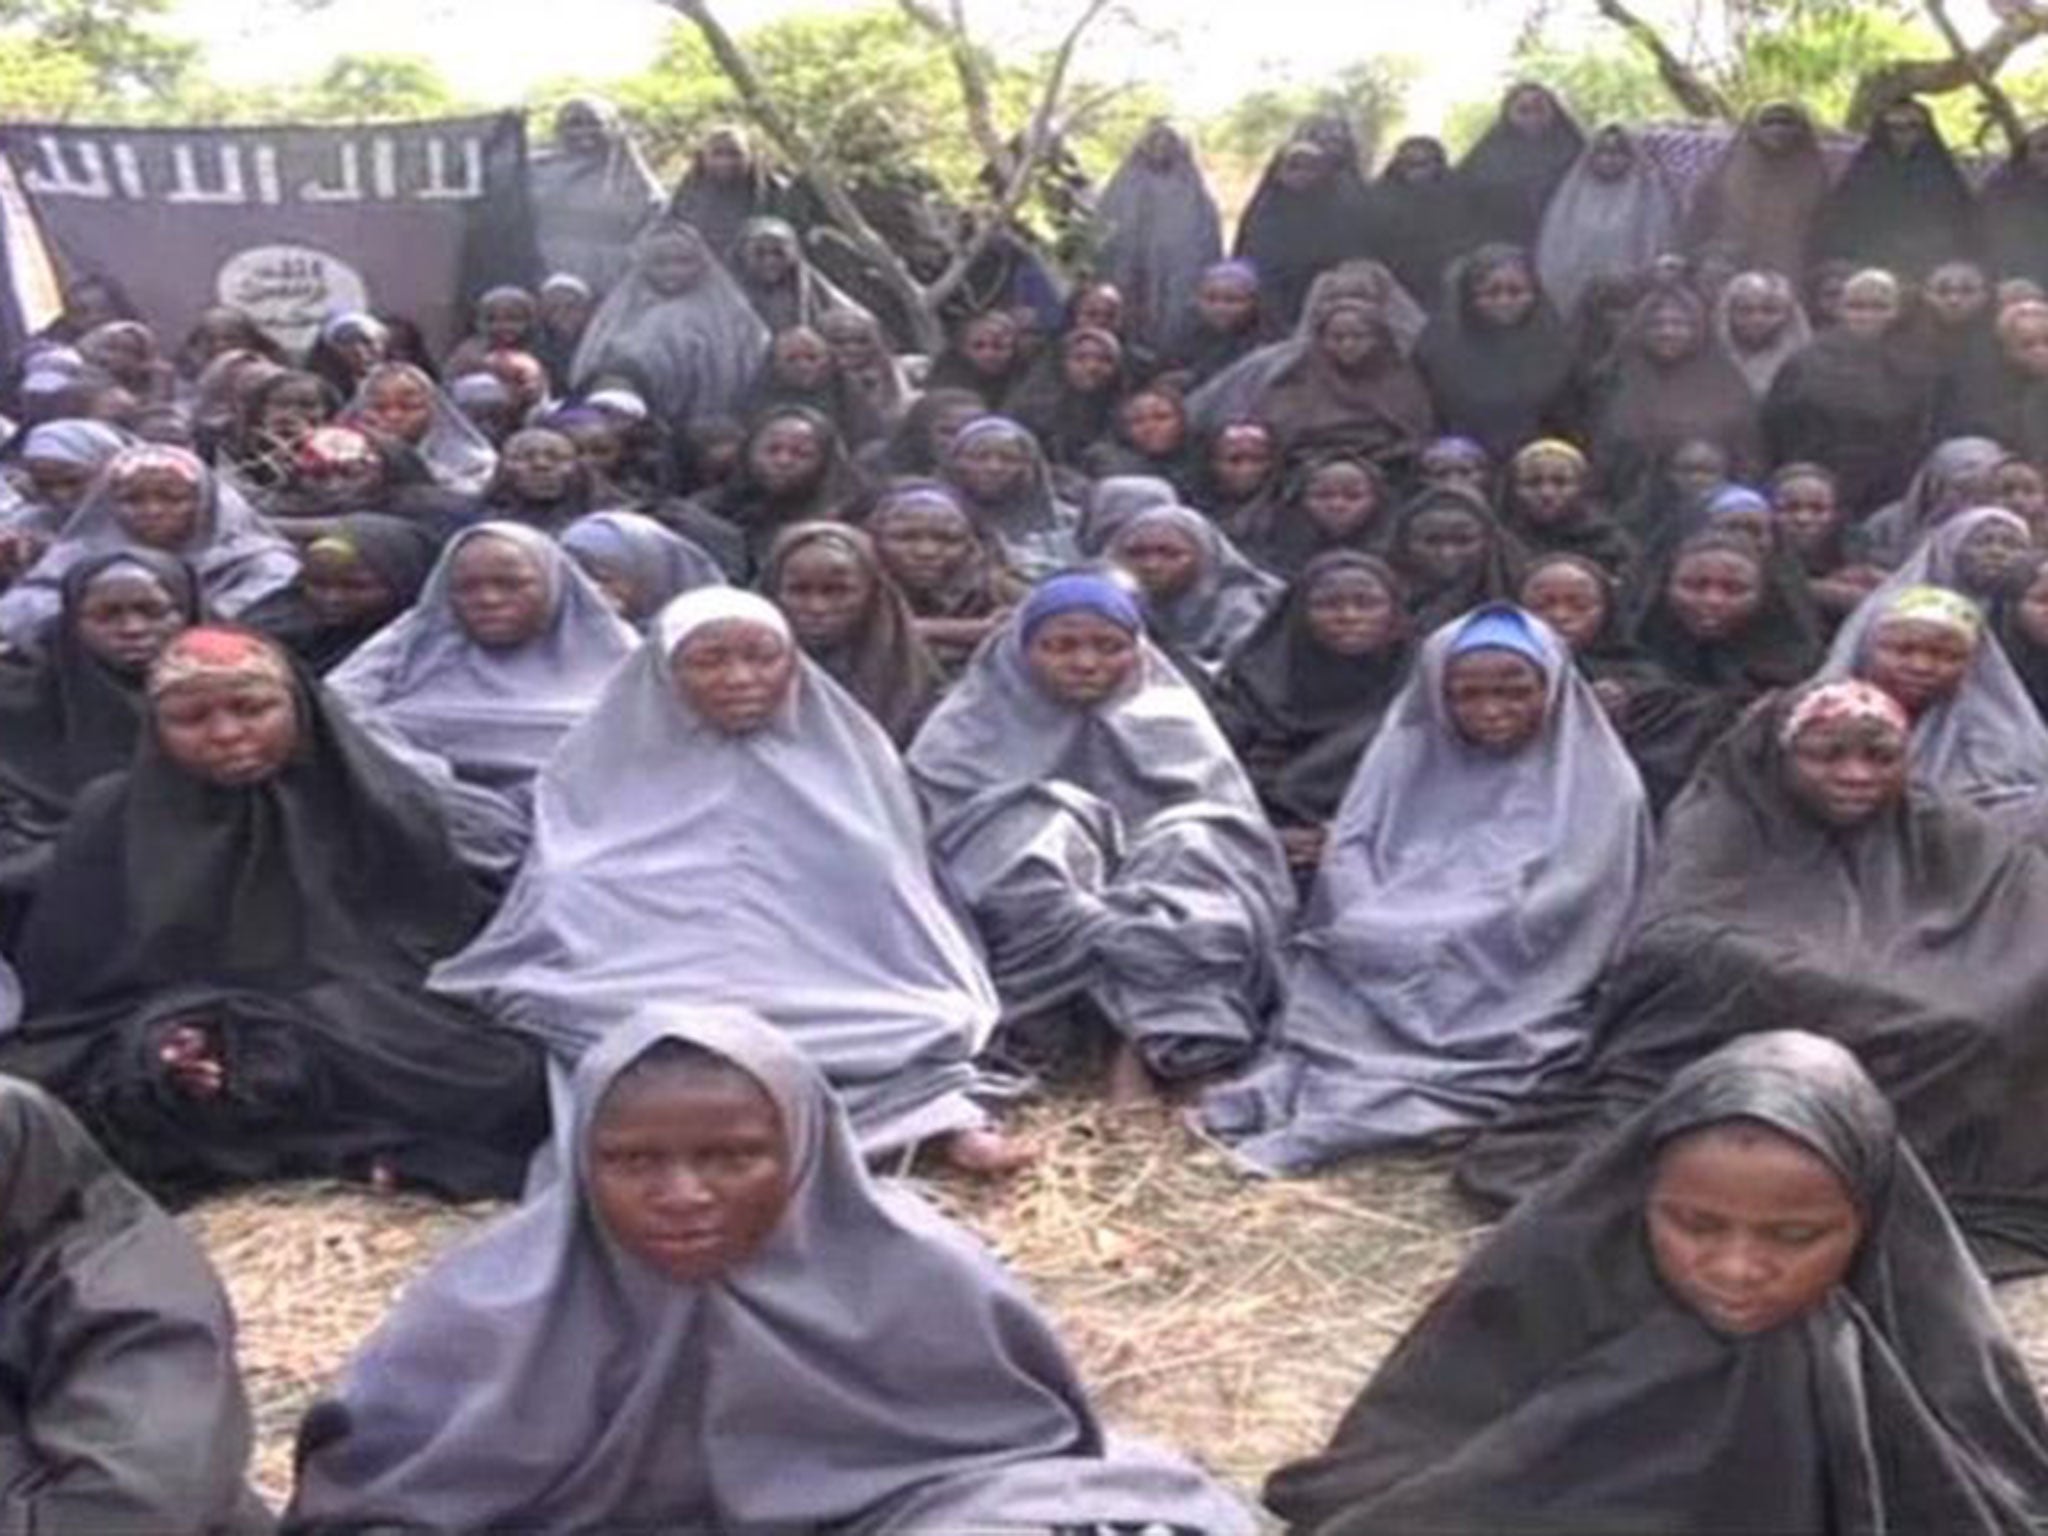 Boko Haram released a video purporting to show the missing girls abducted from Chibok in northern Nigeria almost four weeks ago. Only 130 of the 223 girls still missing are shown